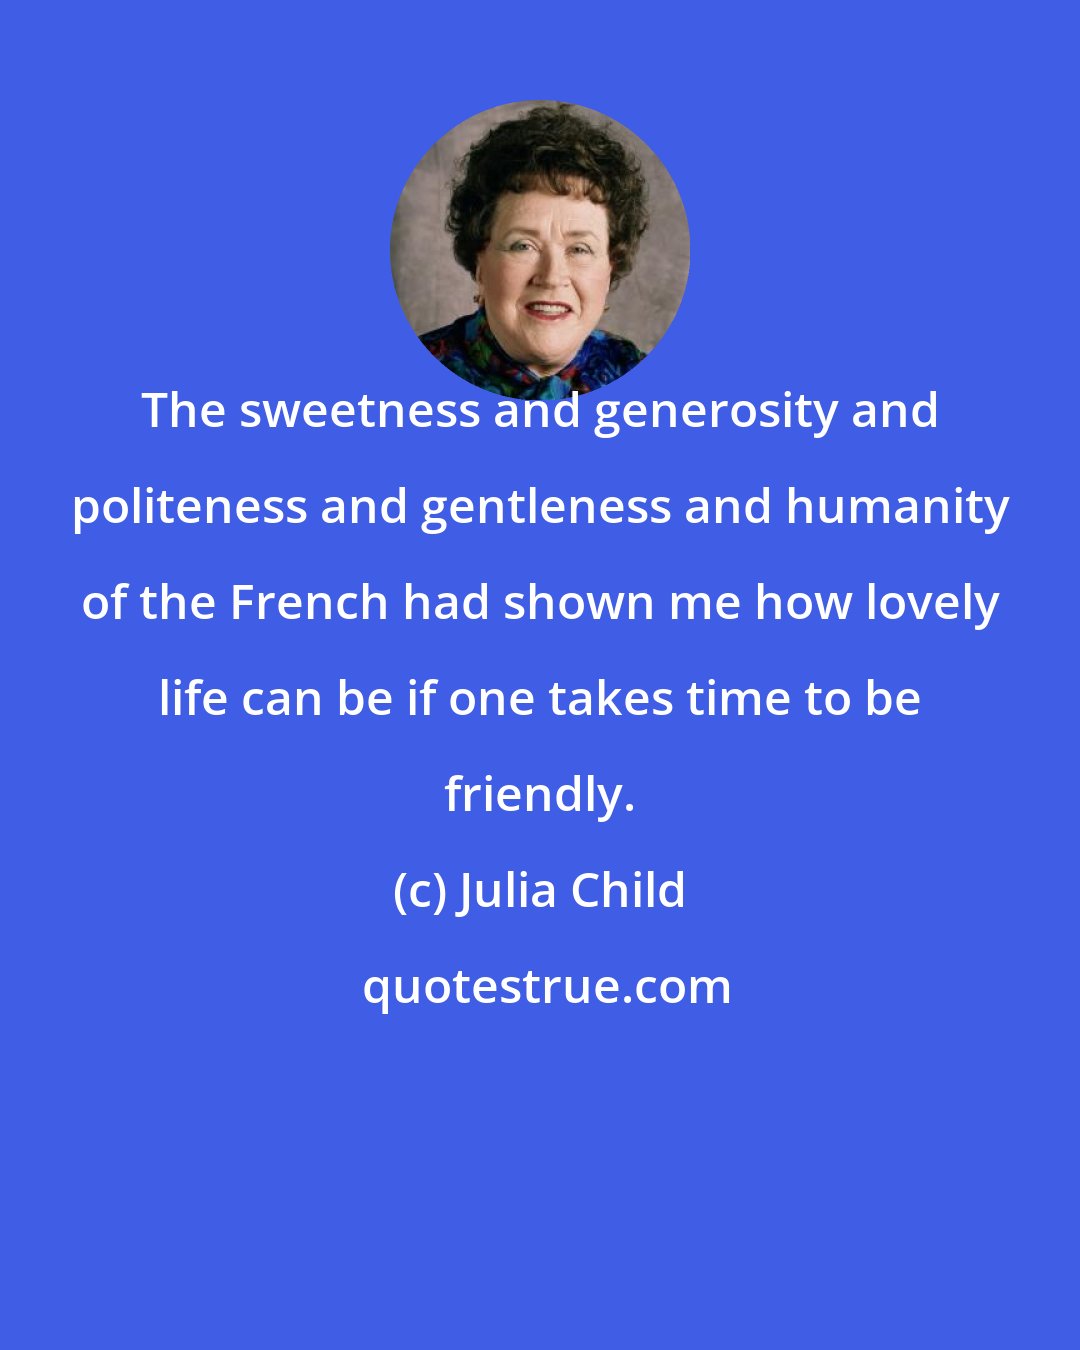 Julia Child: The sweetness and generosity and politeness and gentleness and humanity of the French had shown me how lovely life can be if one takes time to be friendly.